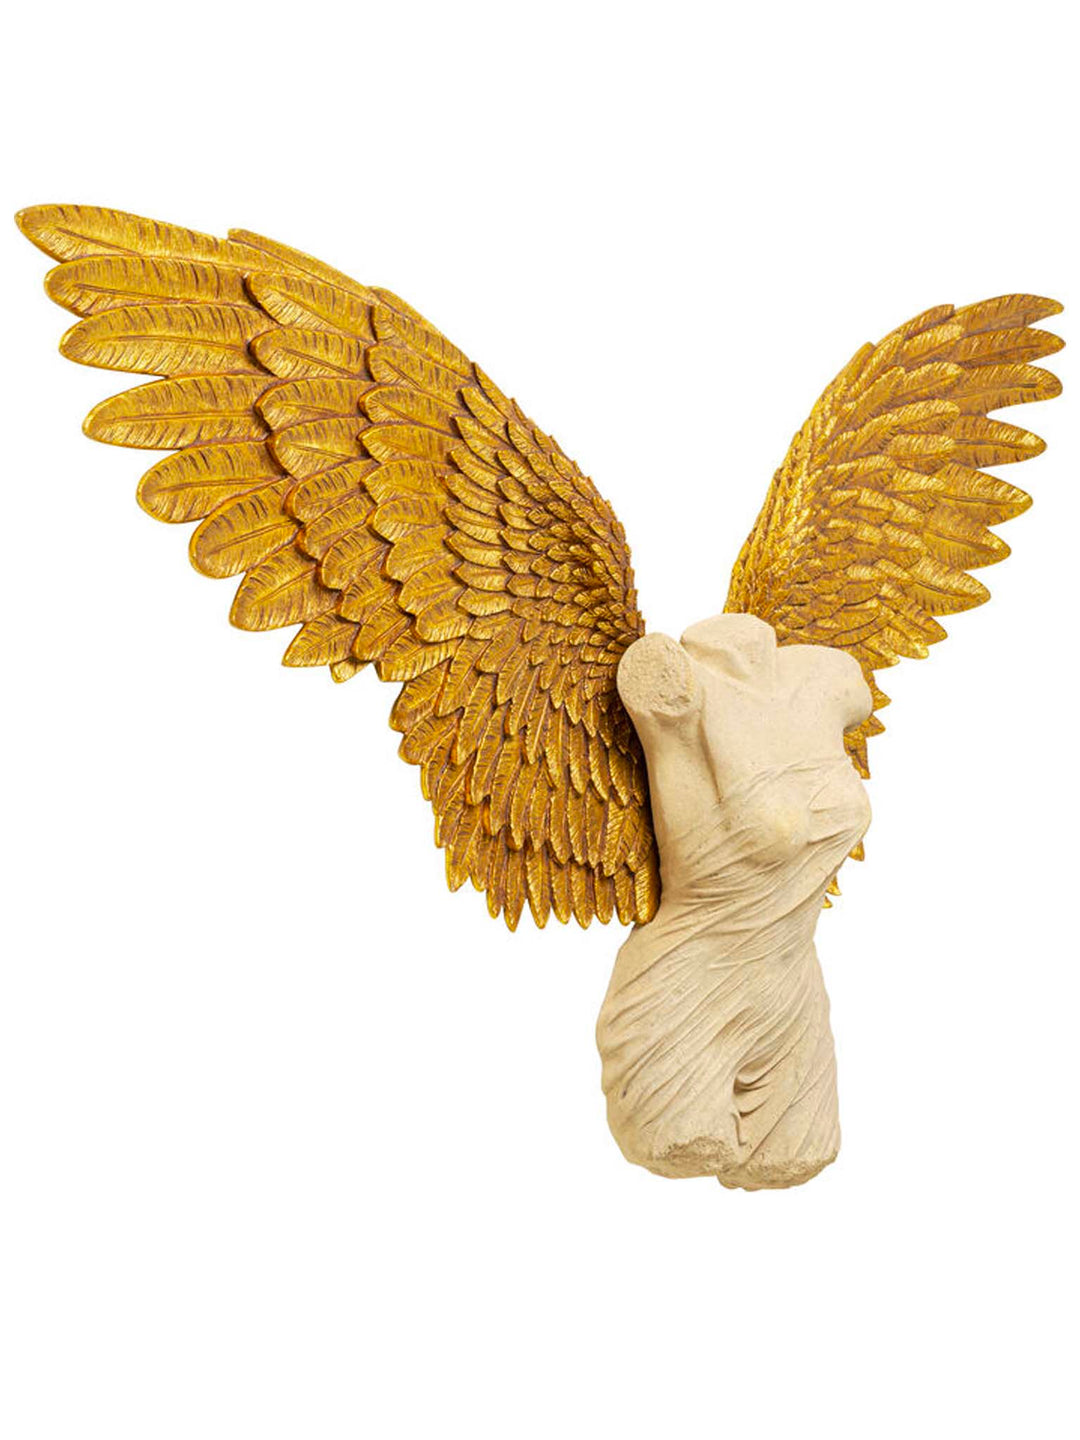 Winged Victory of Samothrace, Winged Angel Gold, gold wings